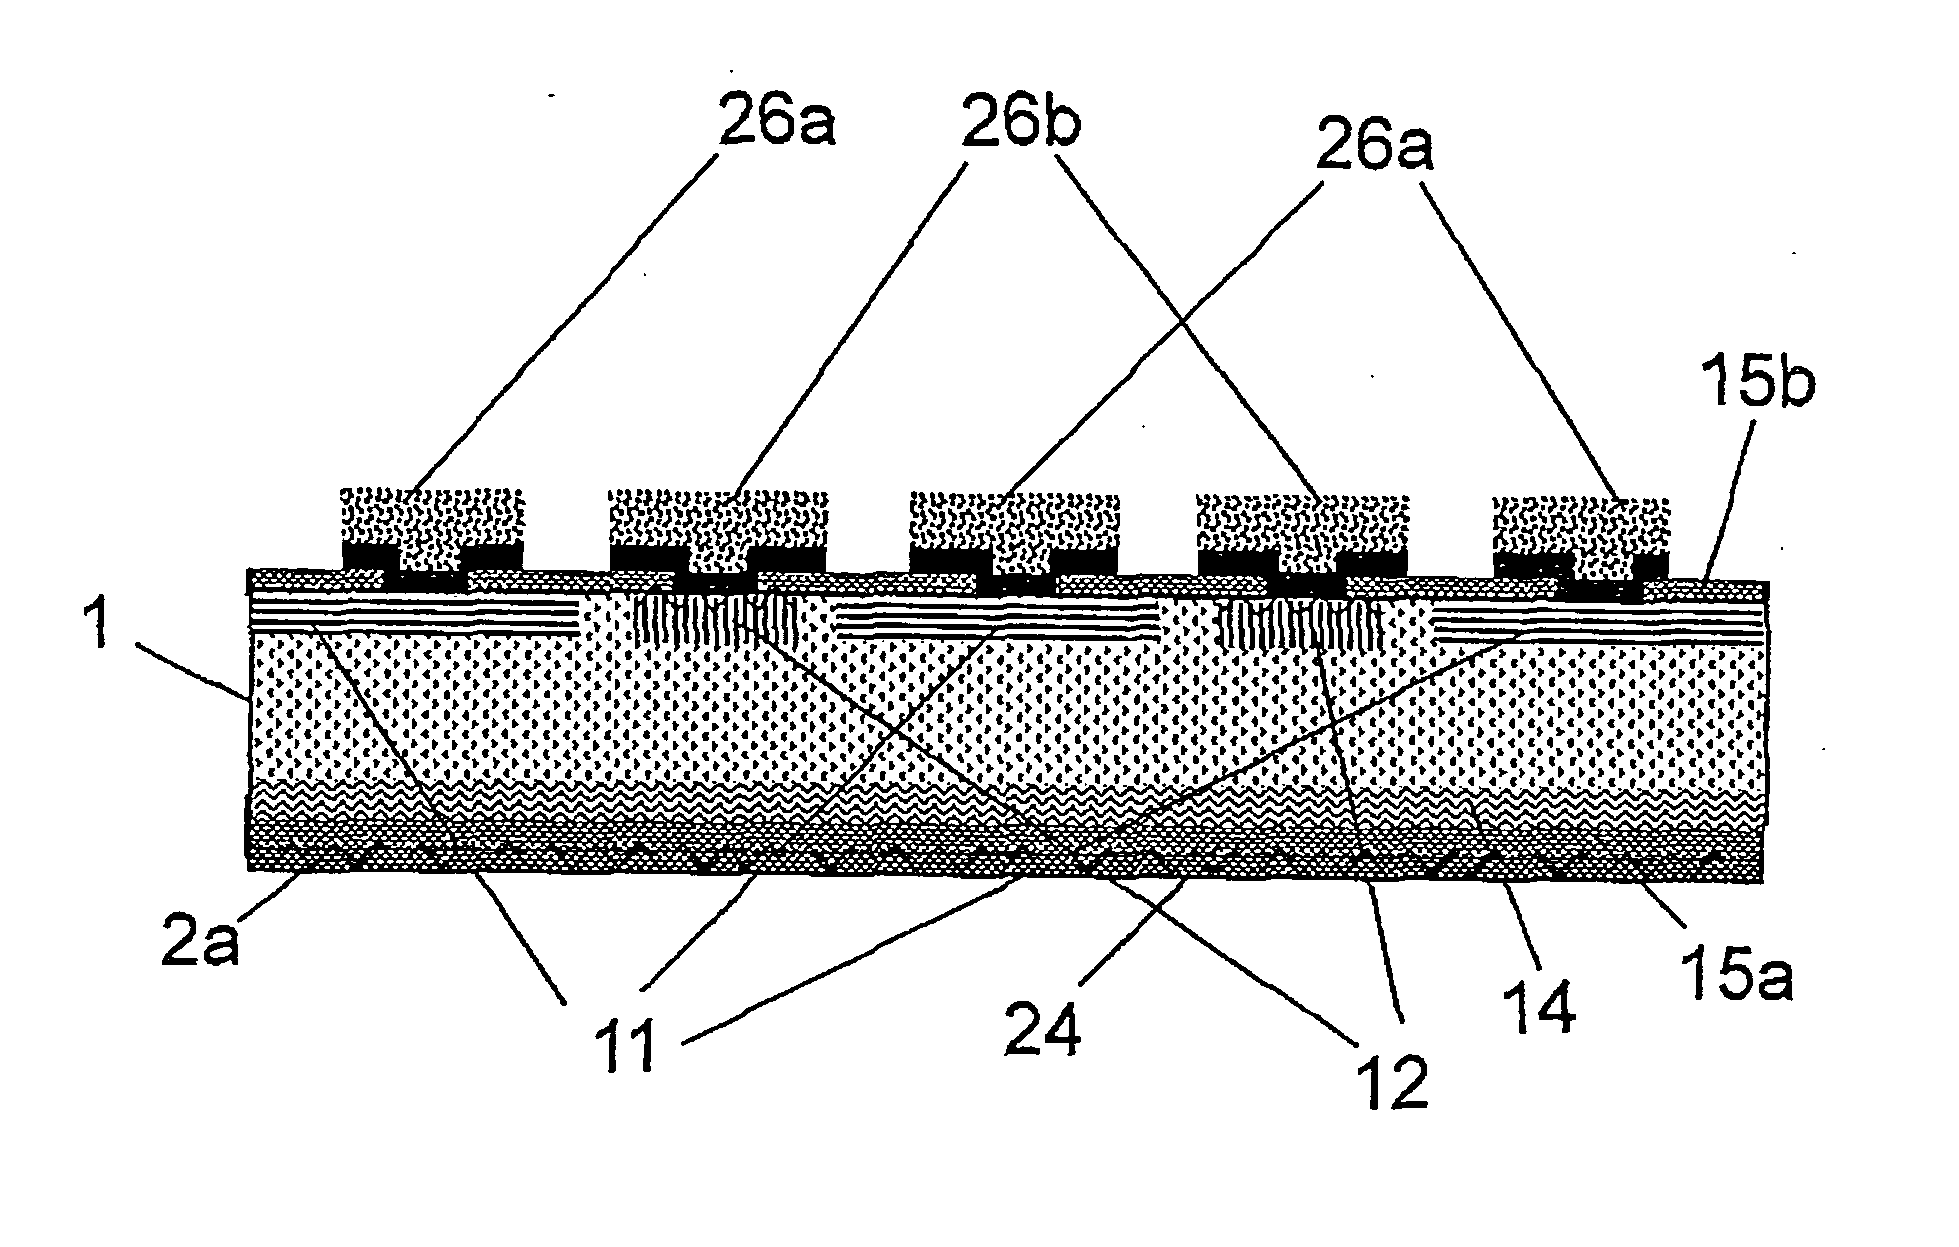 Method  for producing monocrystalline n-silicon solar cells, as well as a solar cell produced according to such a method